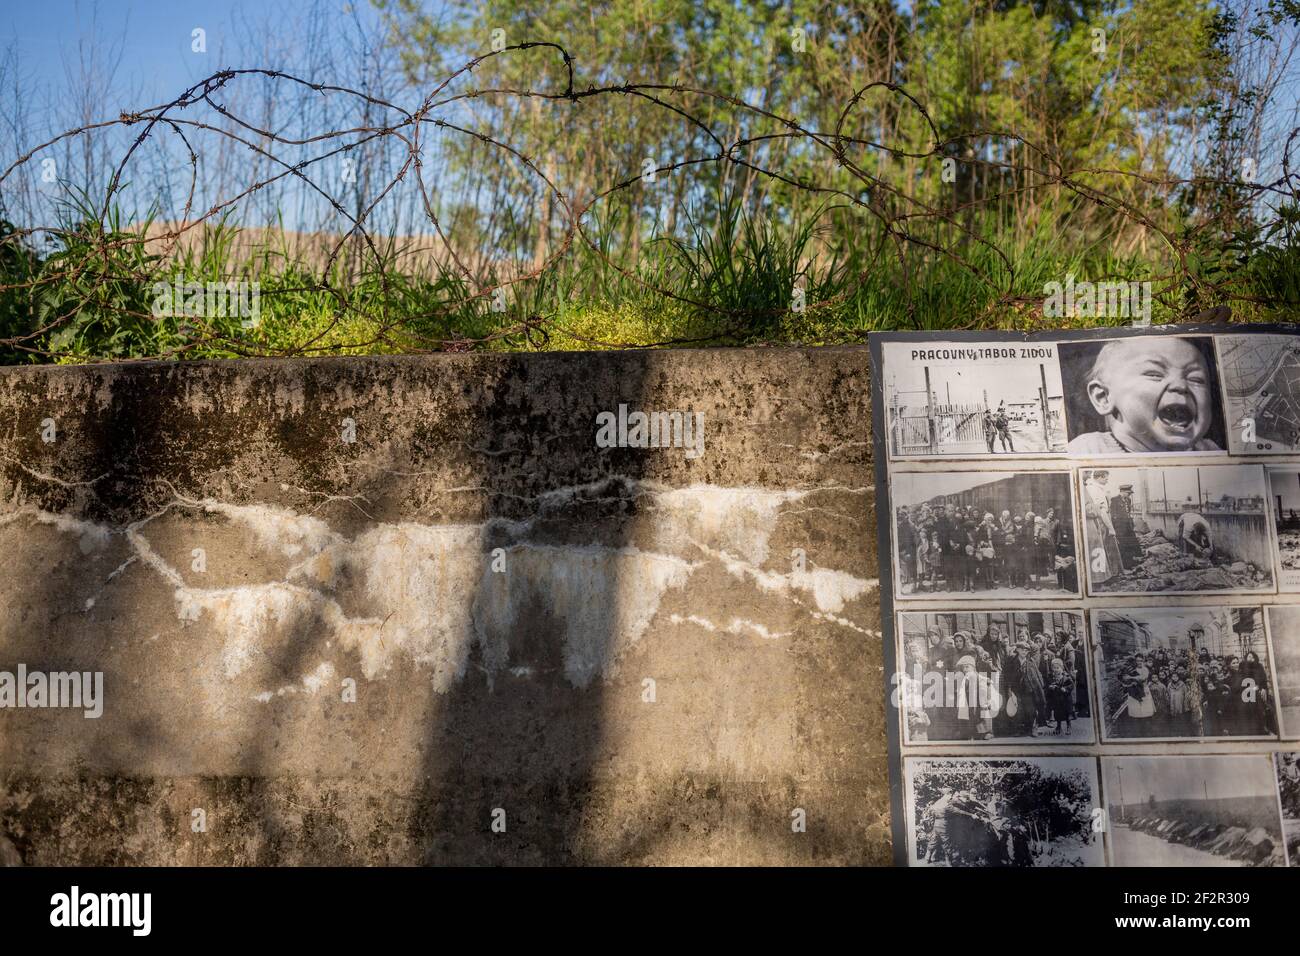 Detail of a historical photographic exhibit in an anti-tank trench from WWII, Petrzalka, Bratislava, Slovakia, close to the borders with Austria. Stock Photo